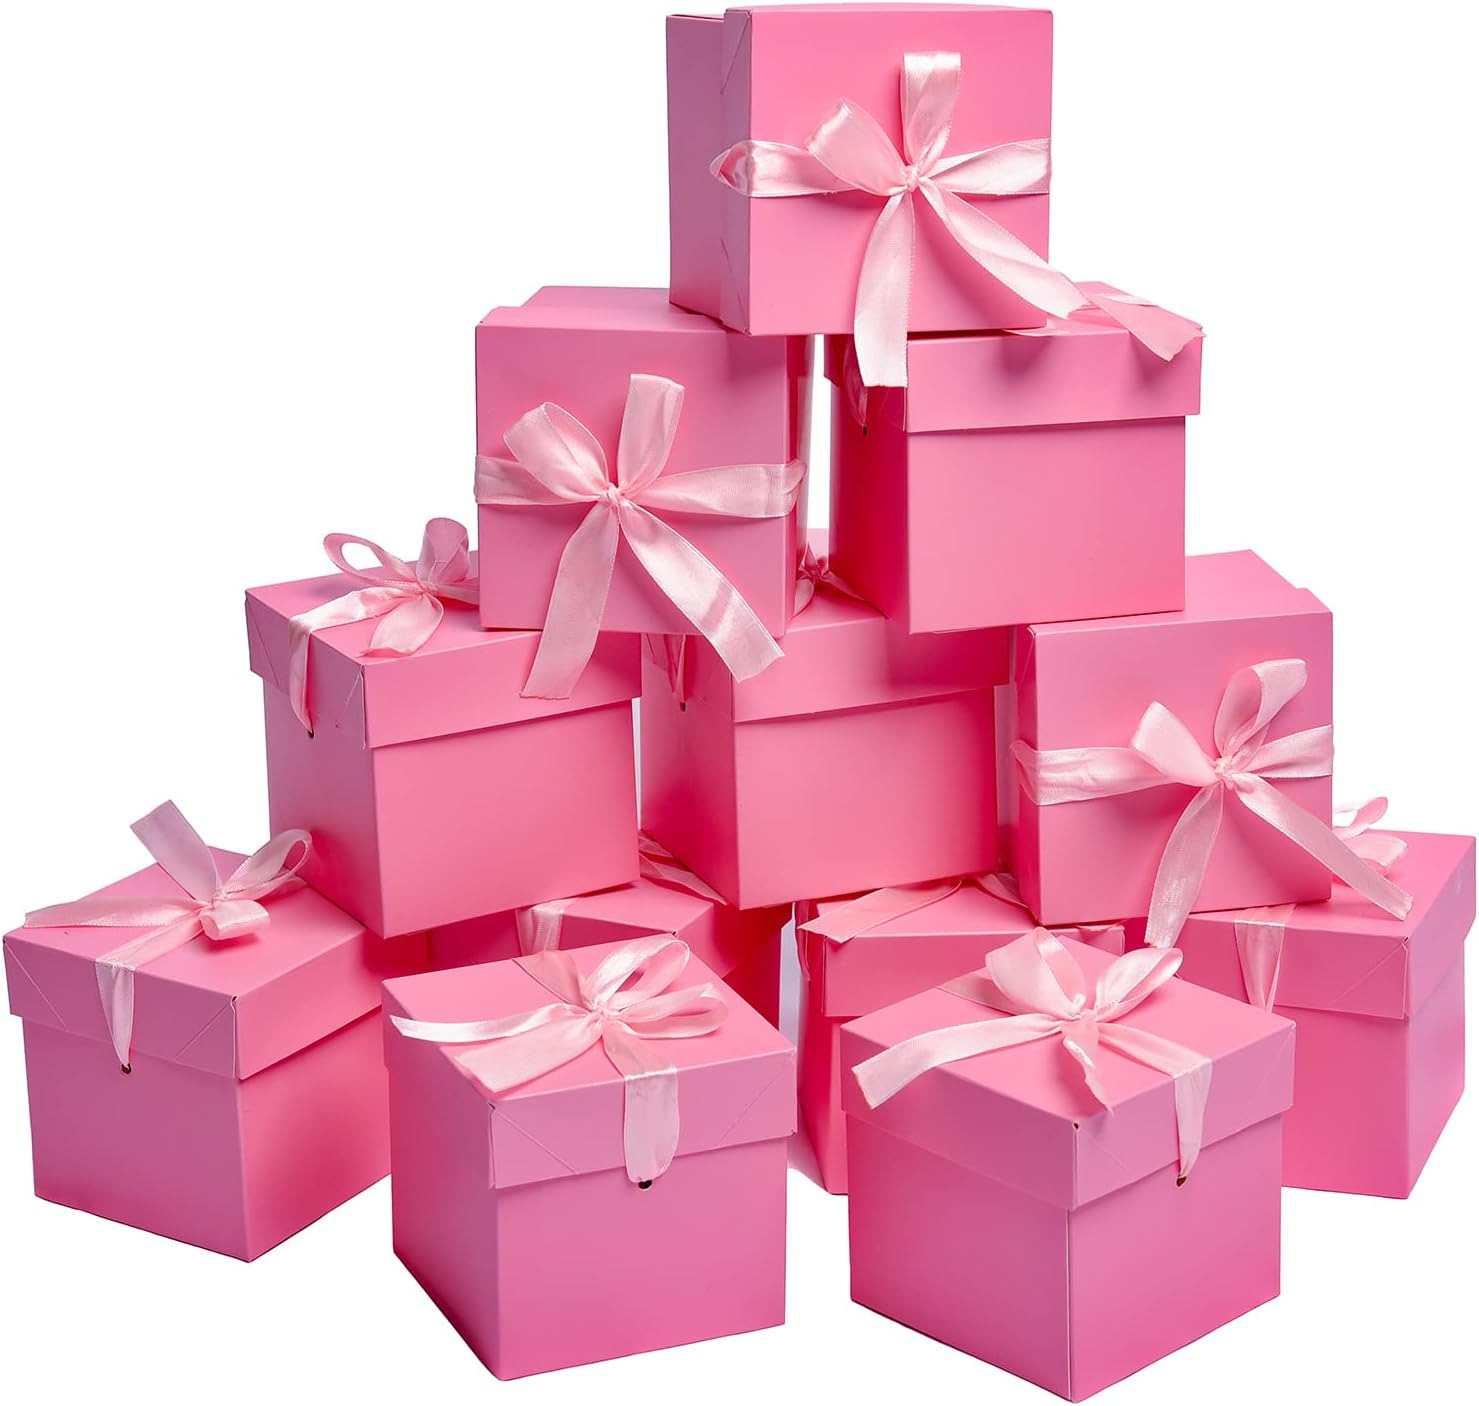 6”×6”×6”Pink Gift Boxes with Lids,12 Pcs Beautiful Squared Boxes with Ribbon Per